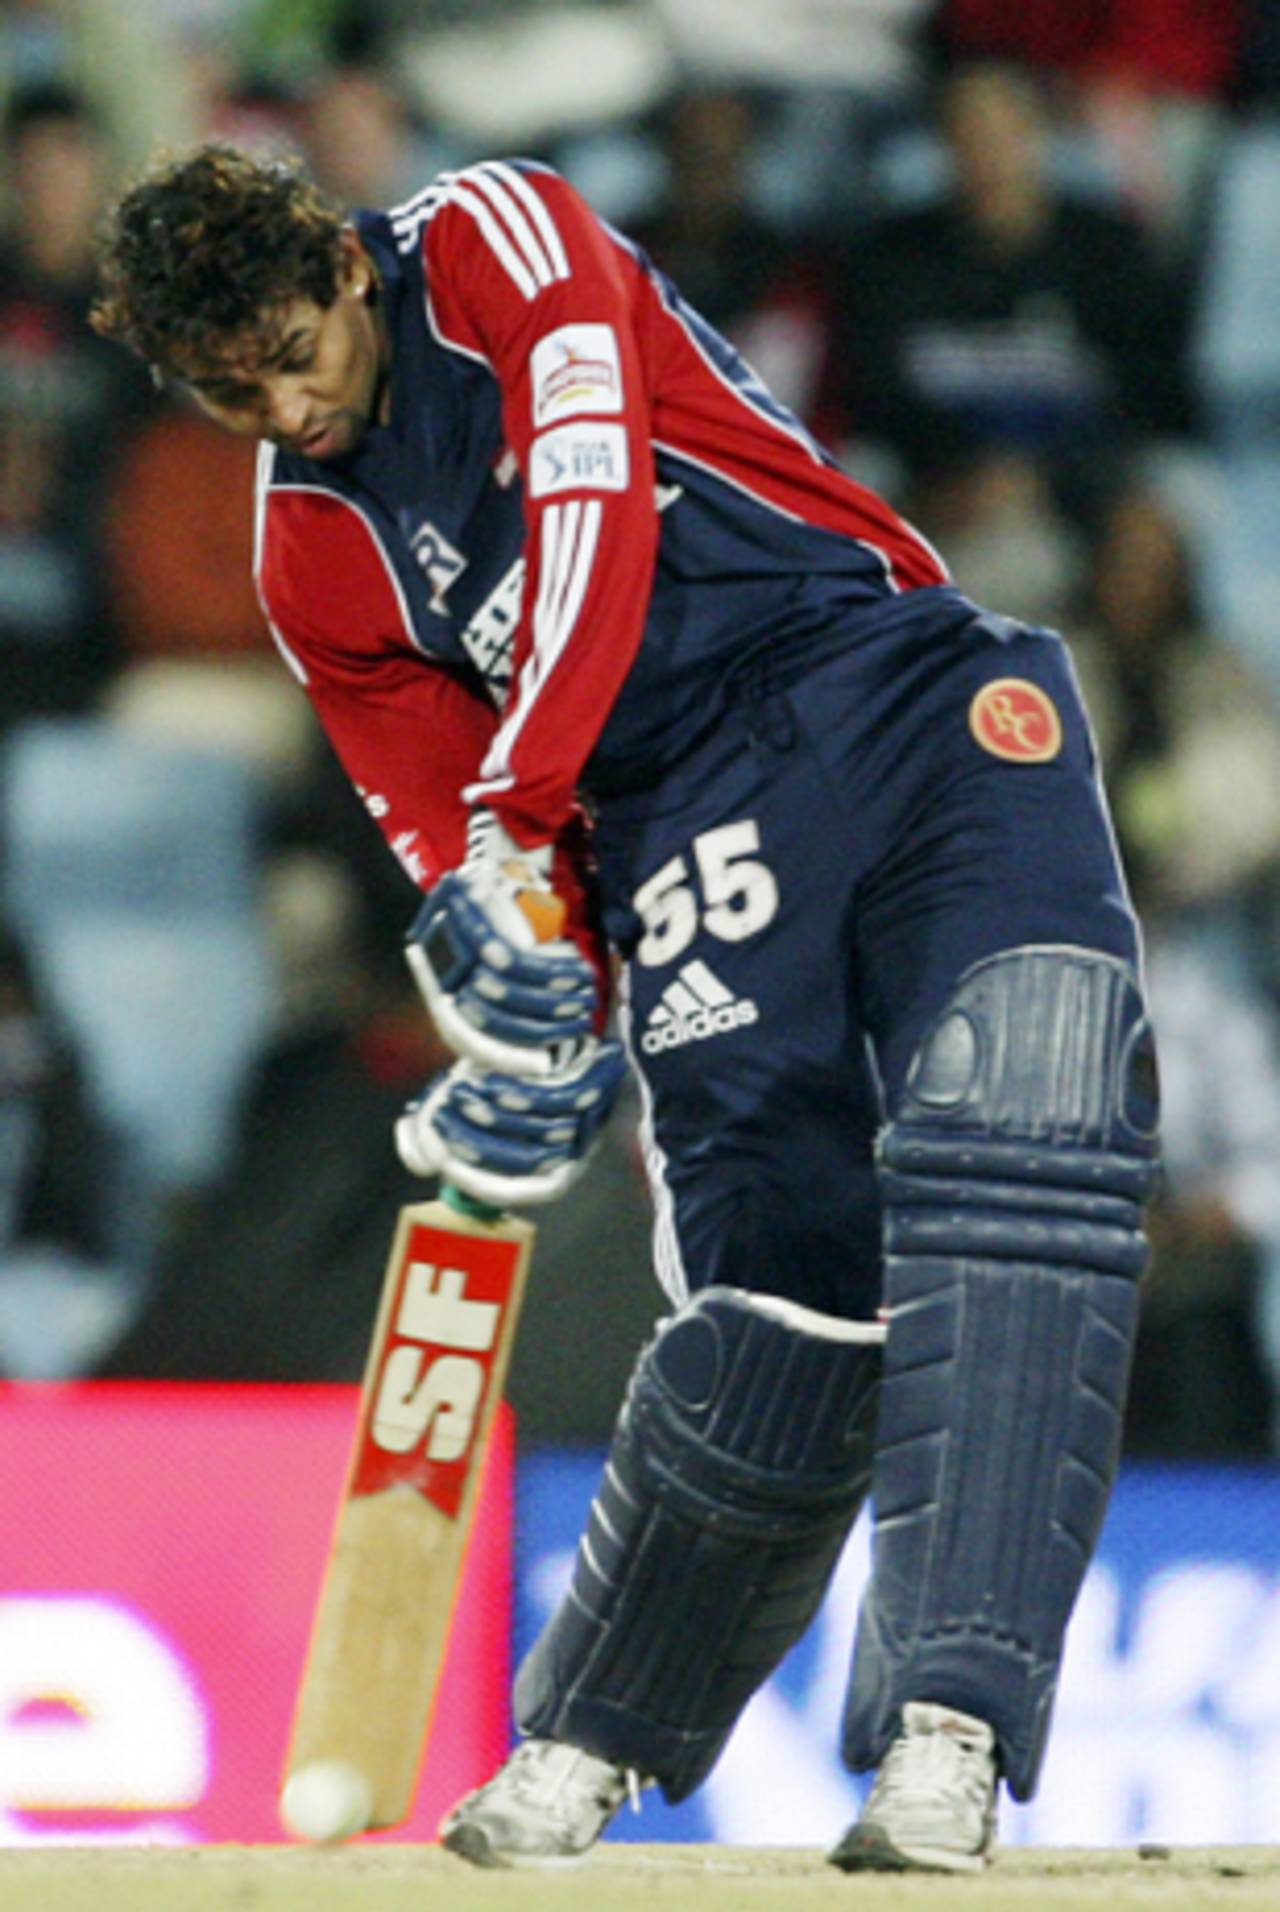 Tillakaratne Dilshan digs out a yorker, Delhi Daredevils v Deccan Chargers, IPL, 1st semi-final, Centurion, May 22, 2009